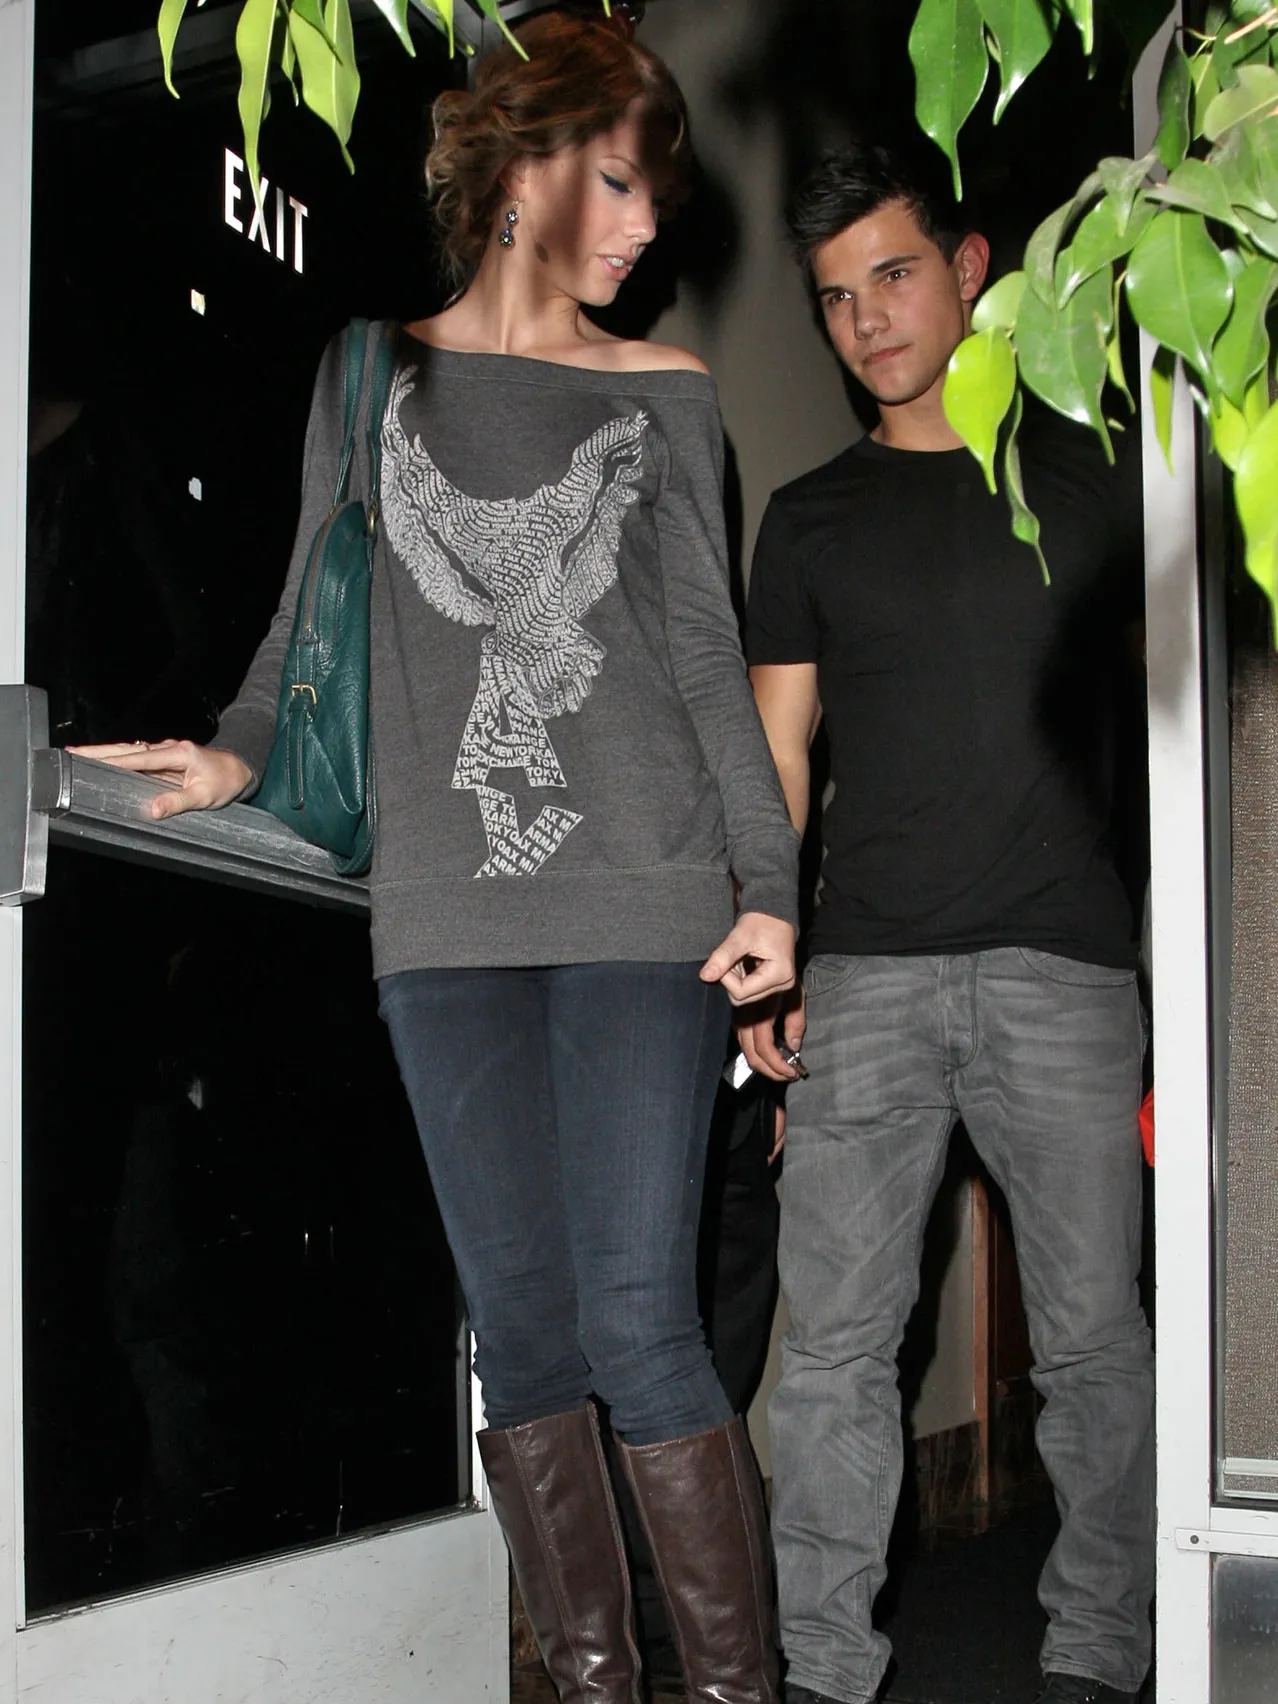 Taylor Swift Relationship with Taylor Lautner